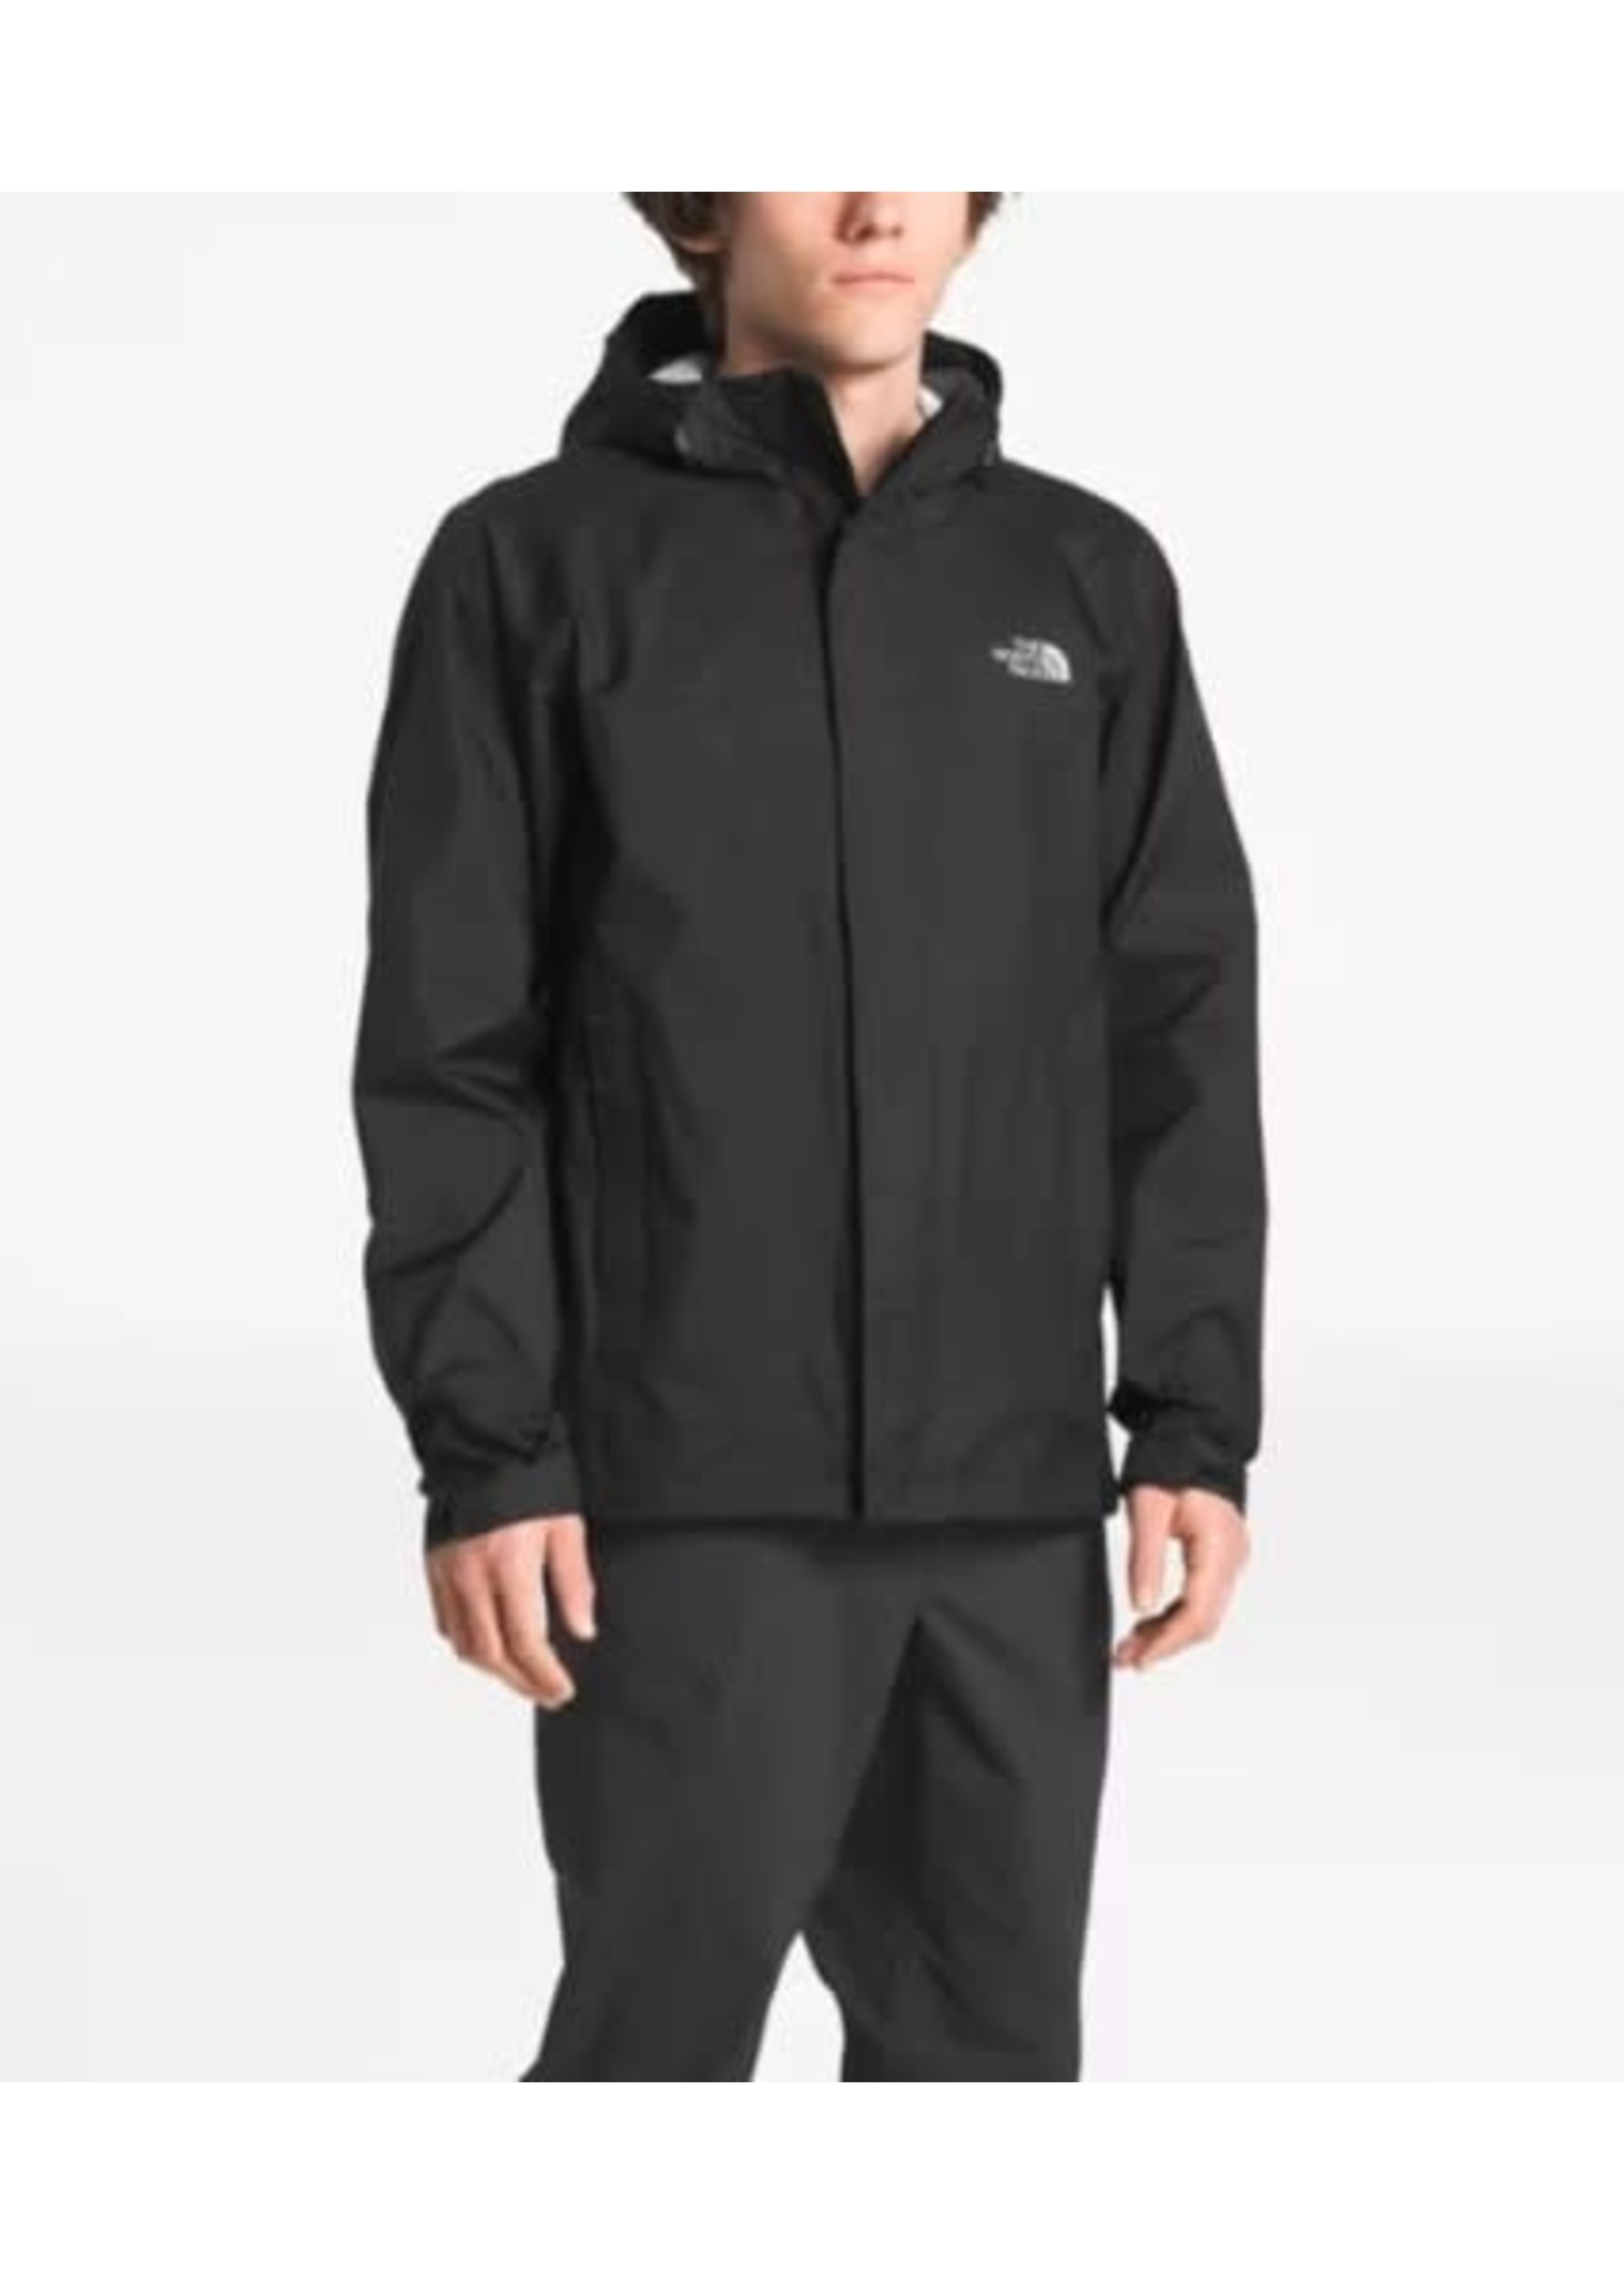 Men's Venture 2 Jacket - Tampa Bay Outfitters